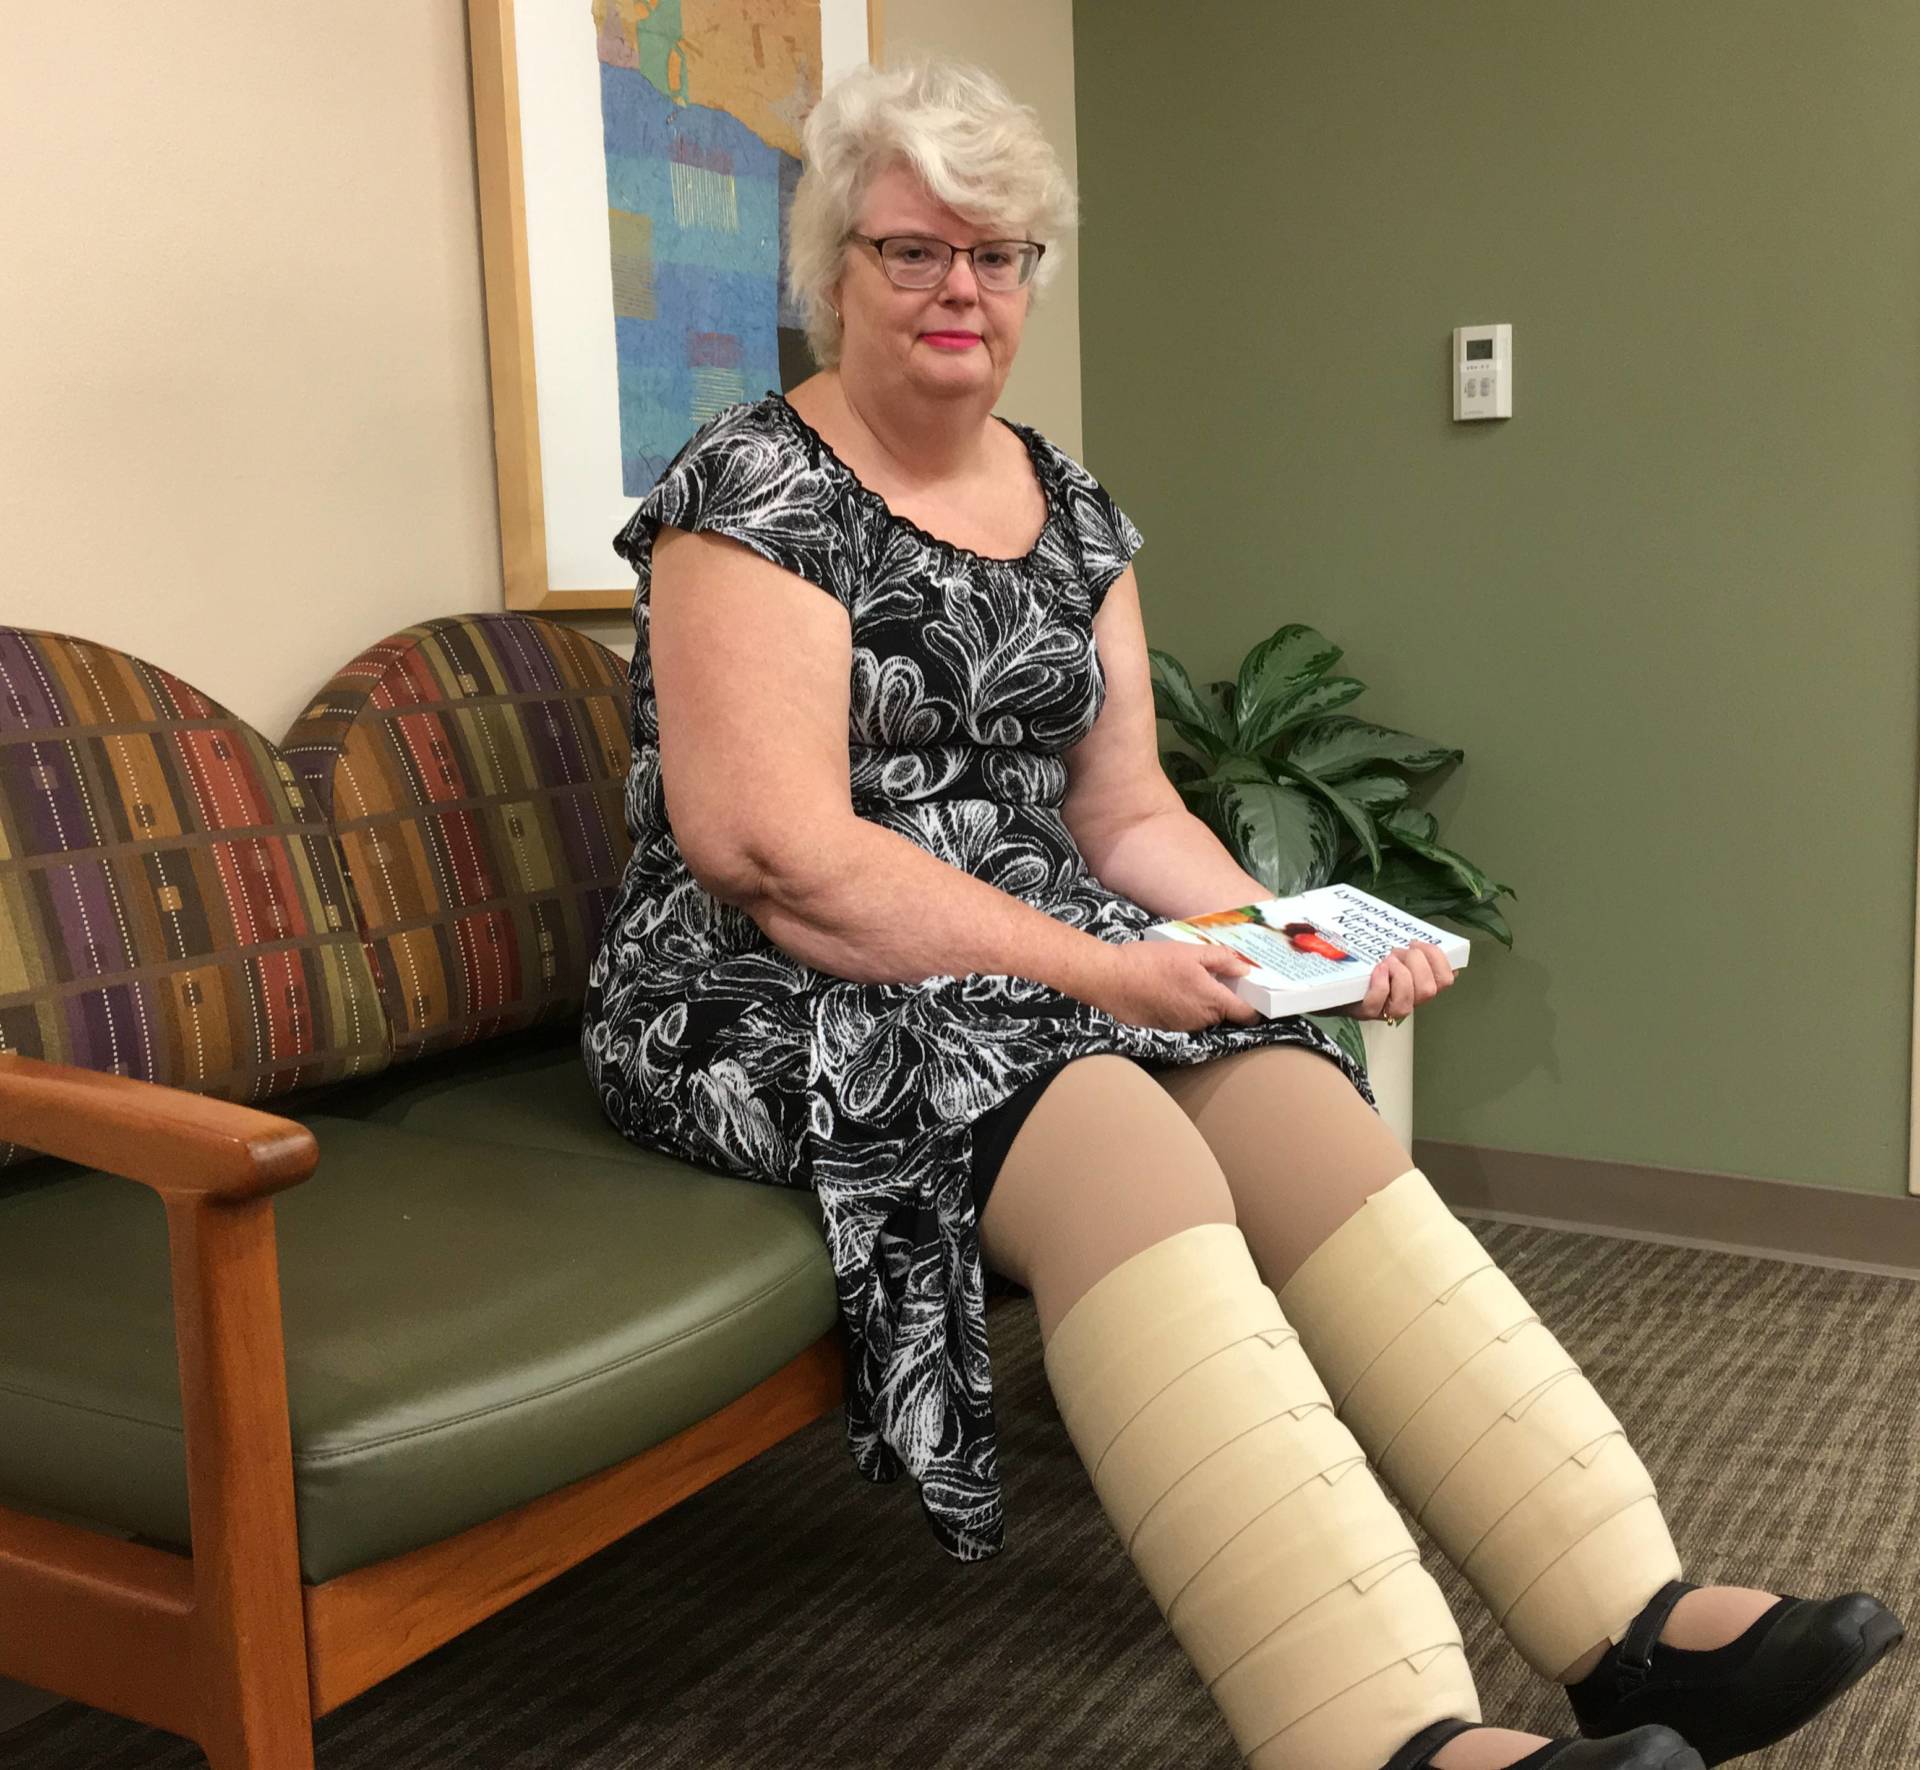 Lymphedema vs Lipedema - Lymphedema Therapy Specialists